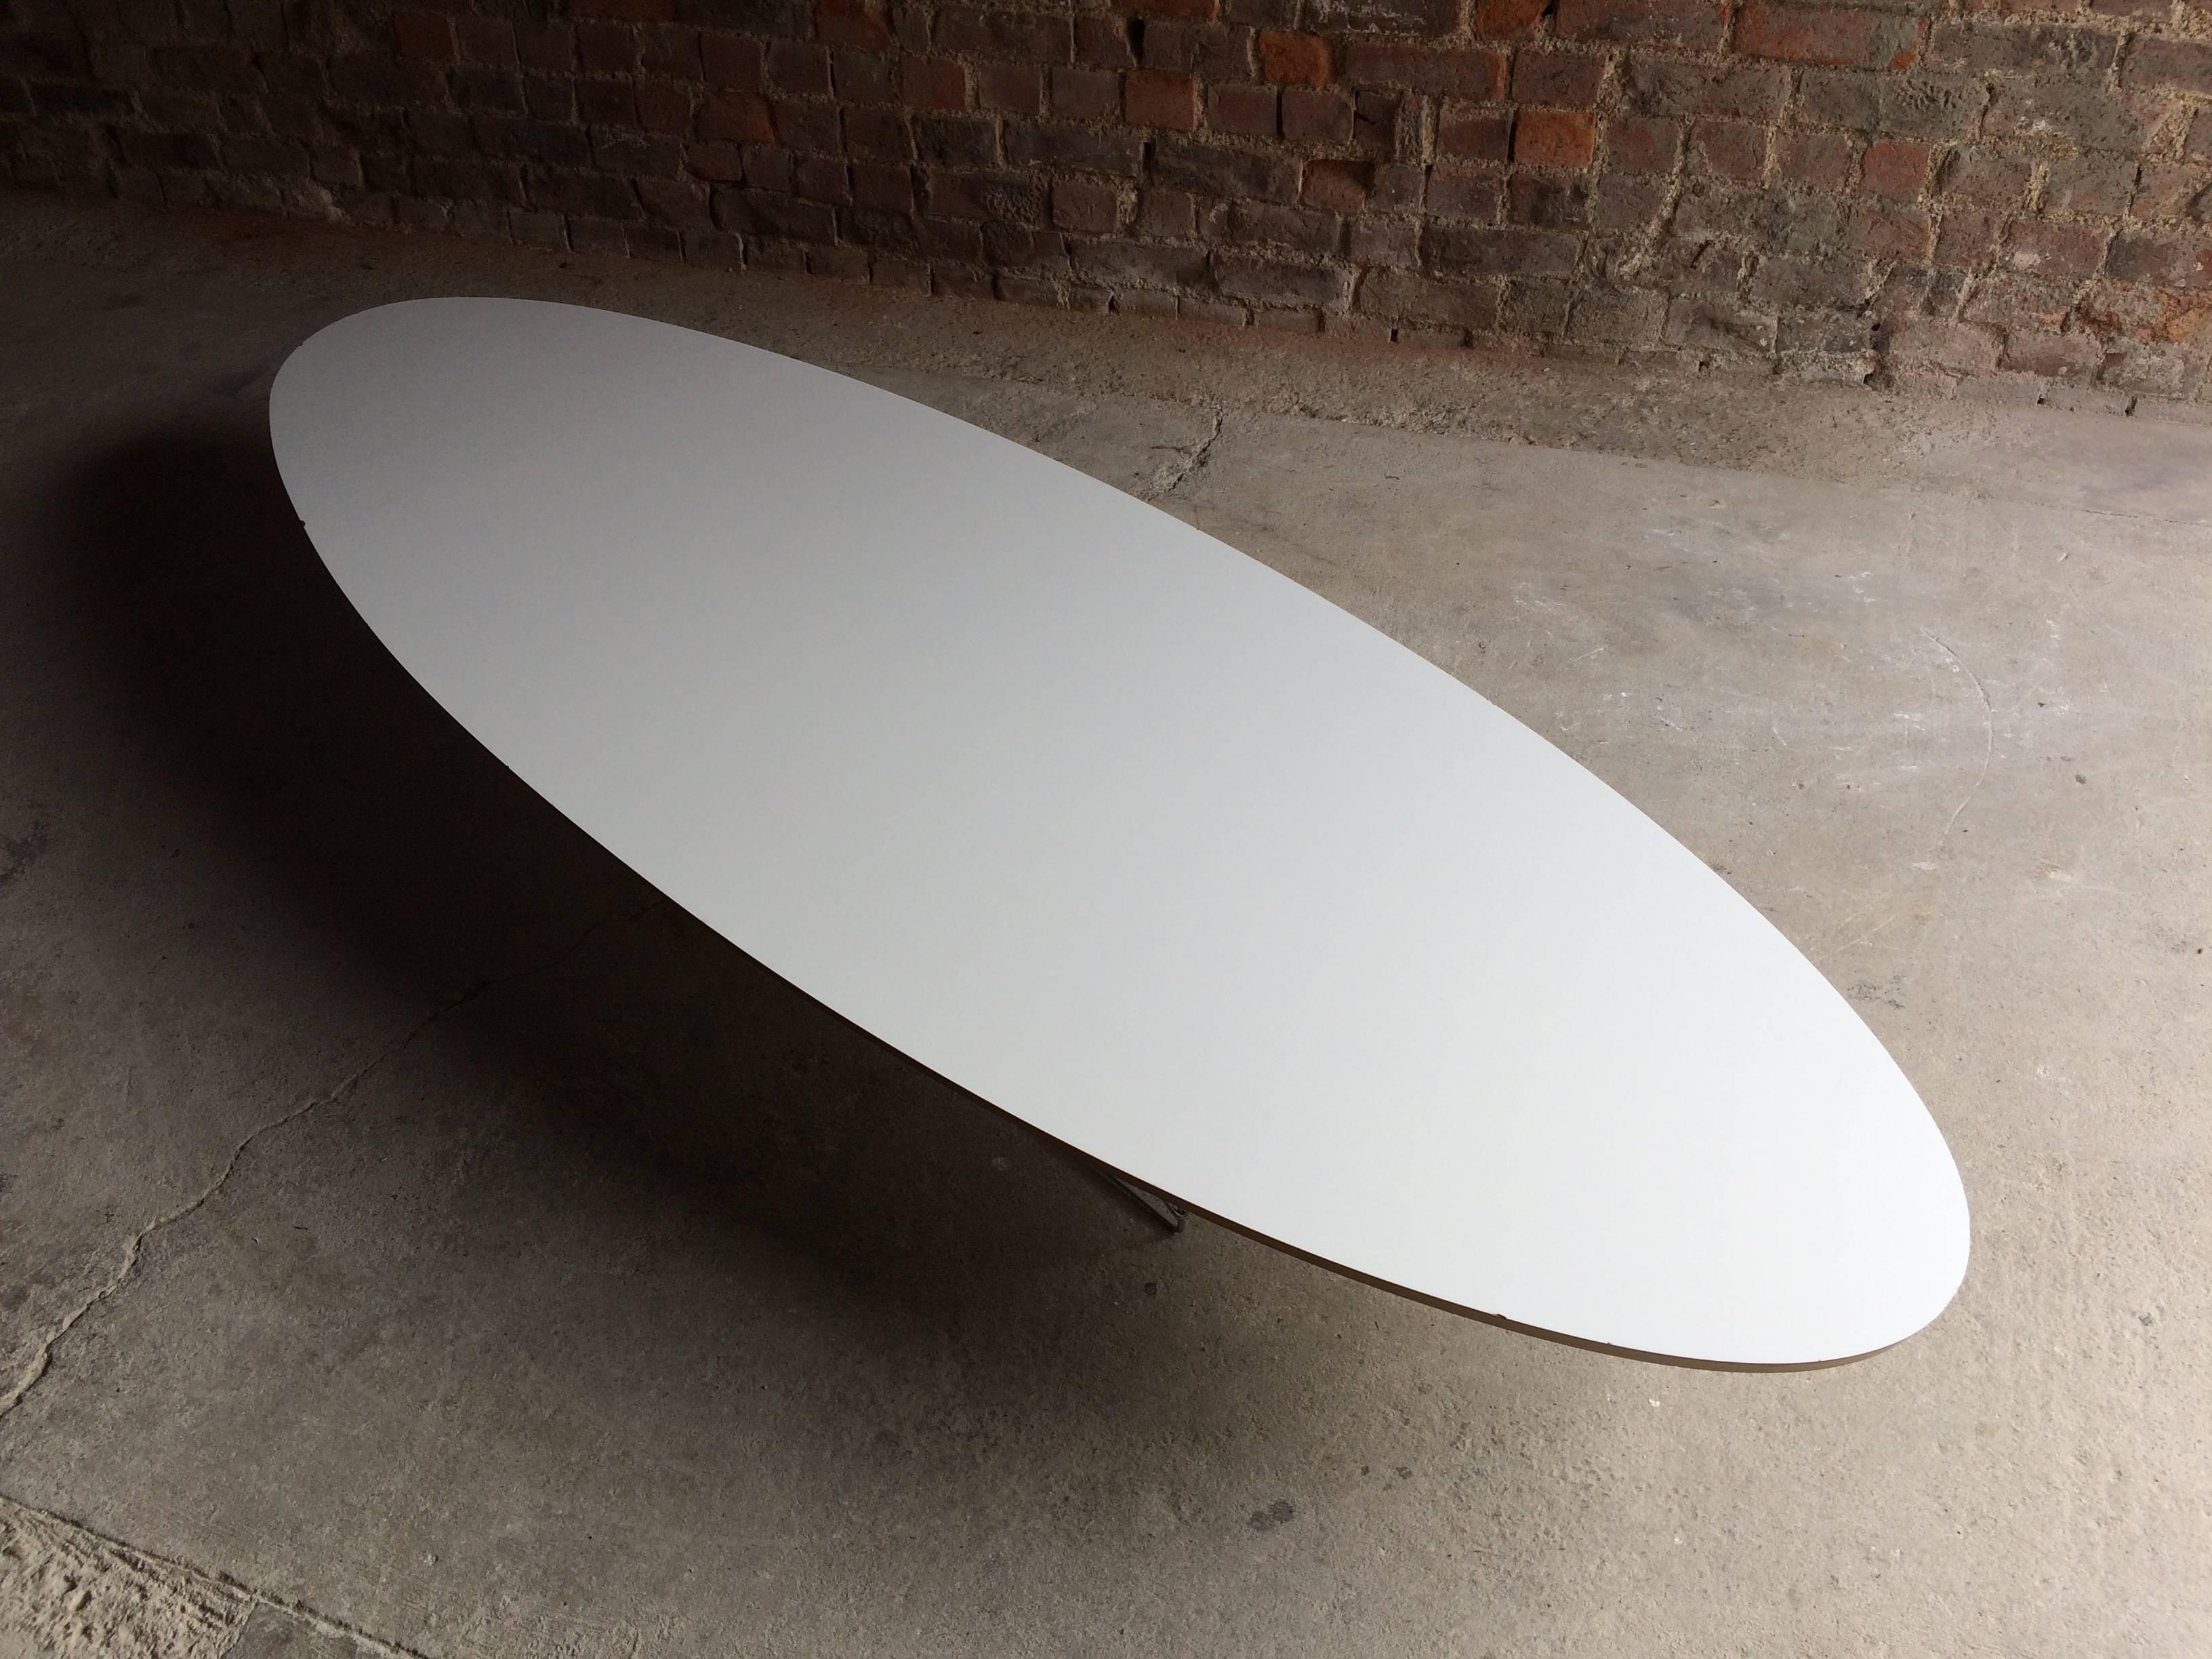 American Charles & Ray Eames Elliptical Etr Coffee Table for Vitra Surfboard, Mid-Century